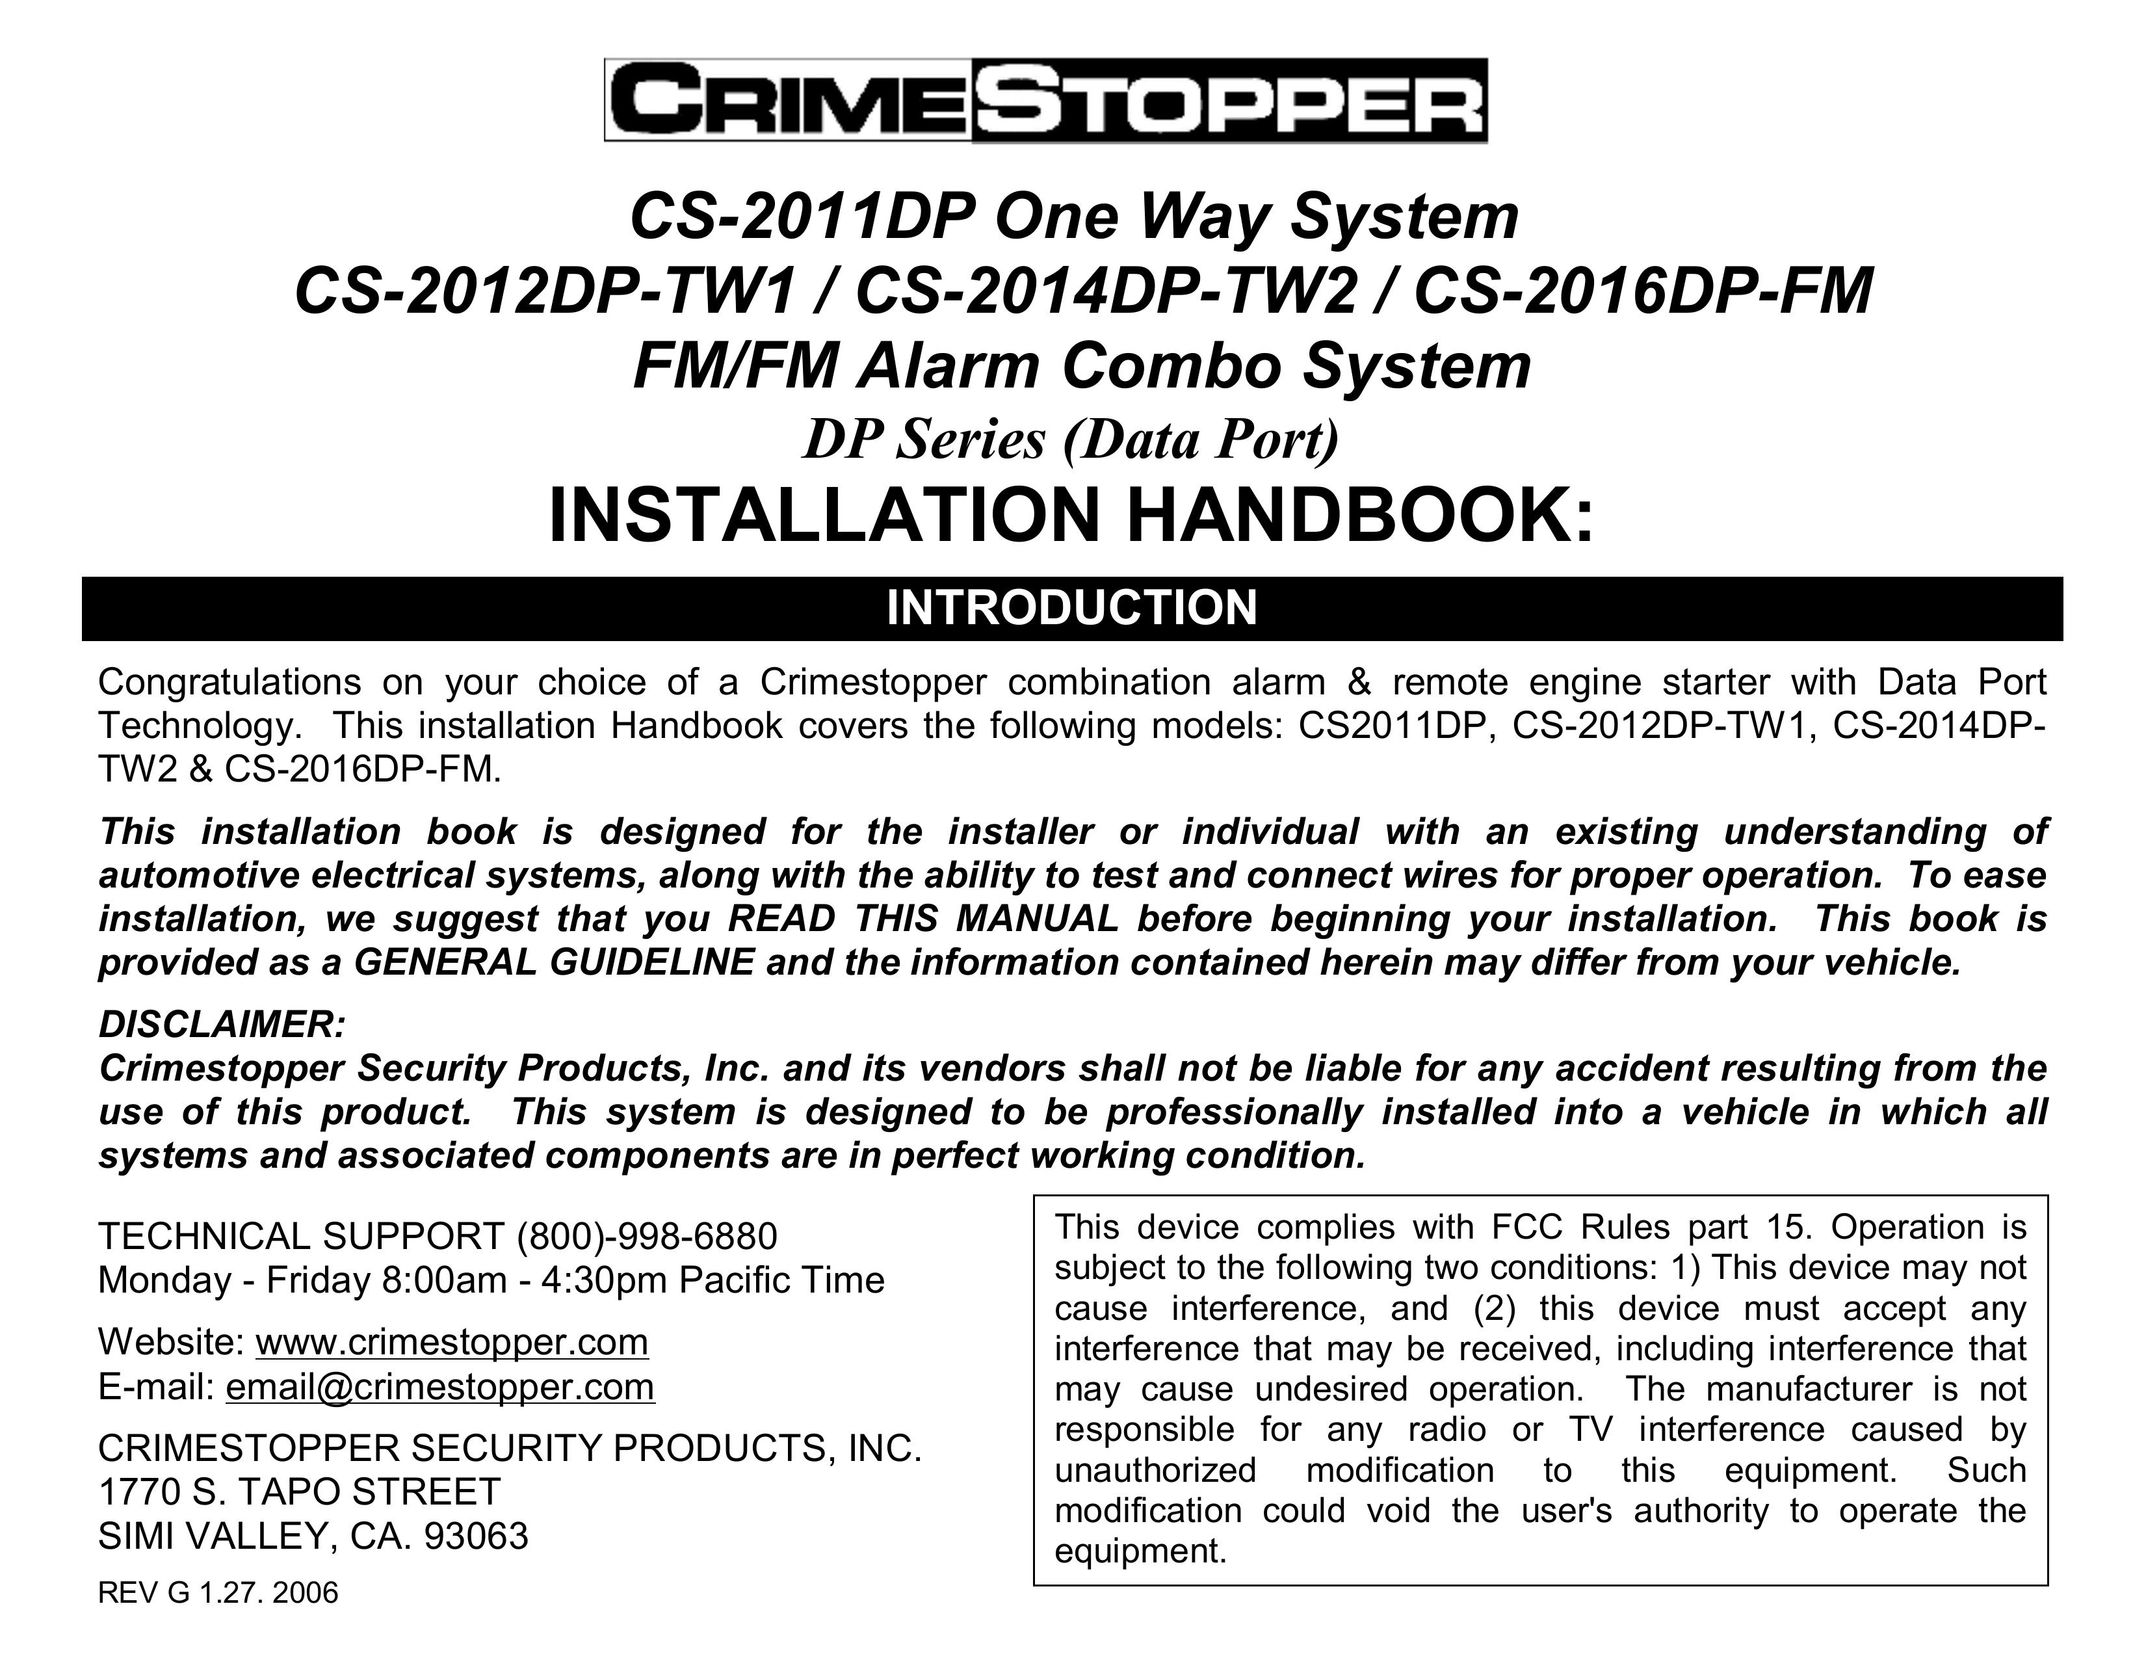 Crimestopper Security Products CS-2012DP-TW1 Home Security System User Manual